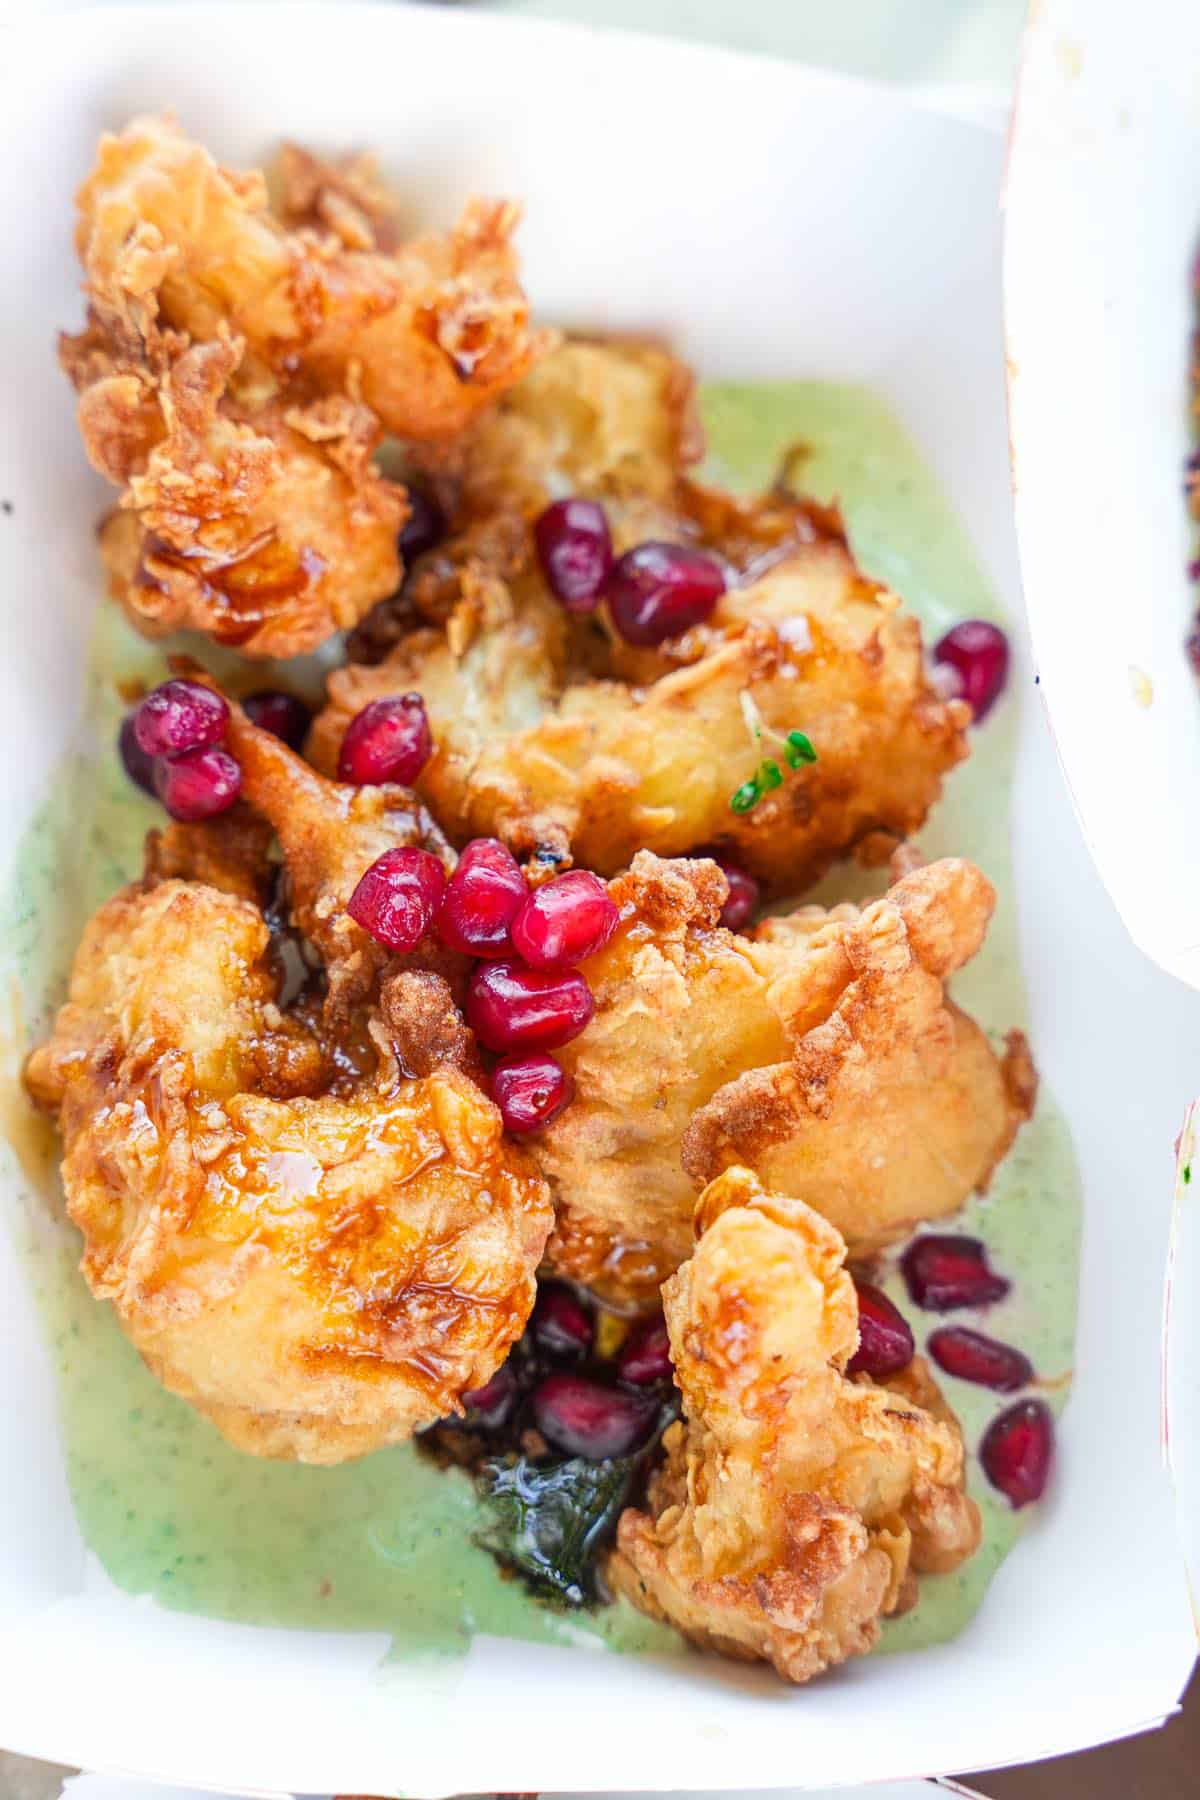 A plate of fried cauliflower with pomegranate sauce.